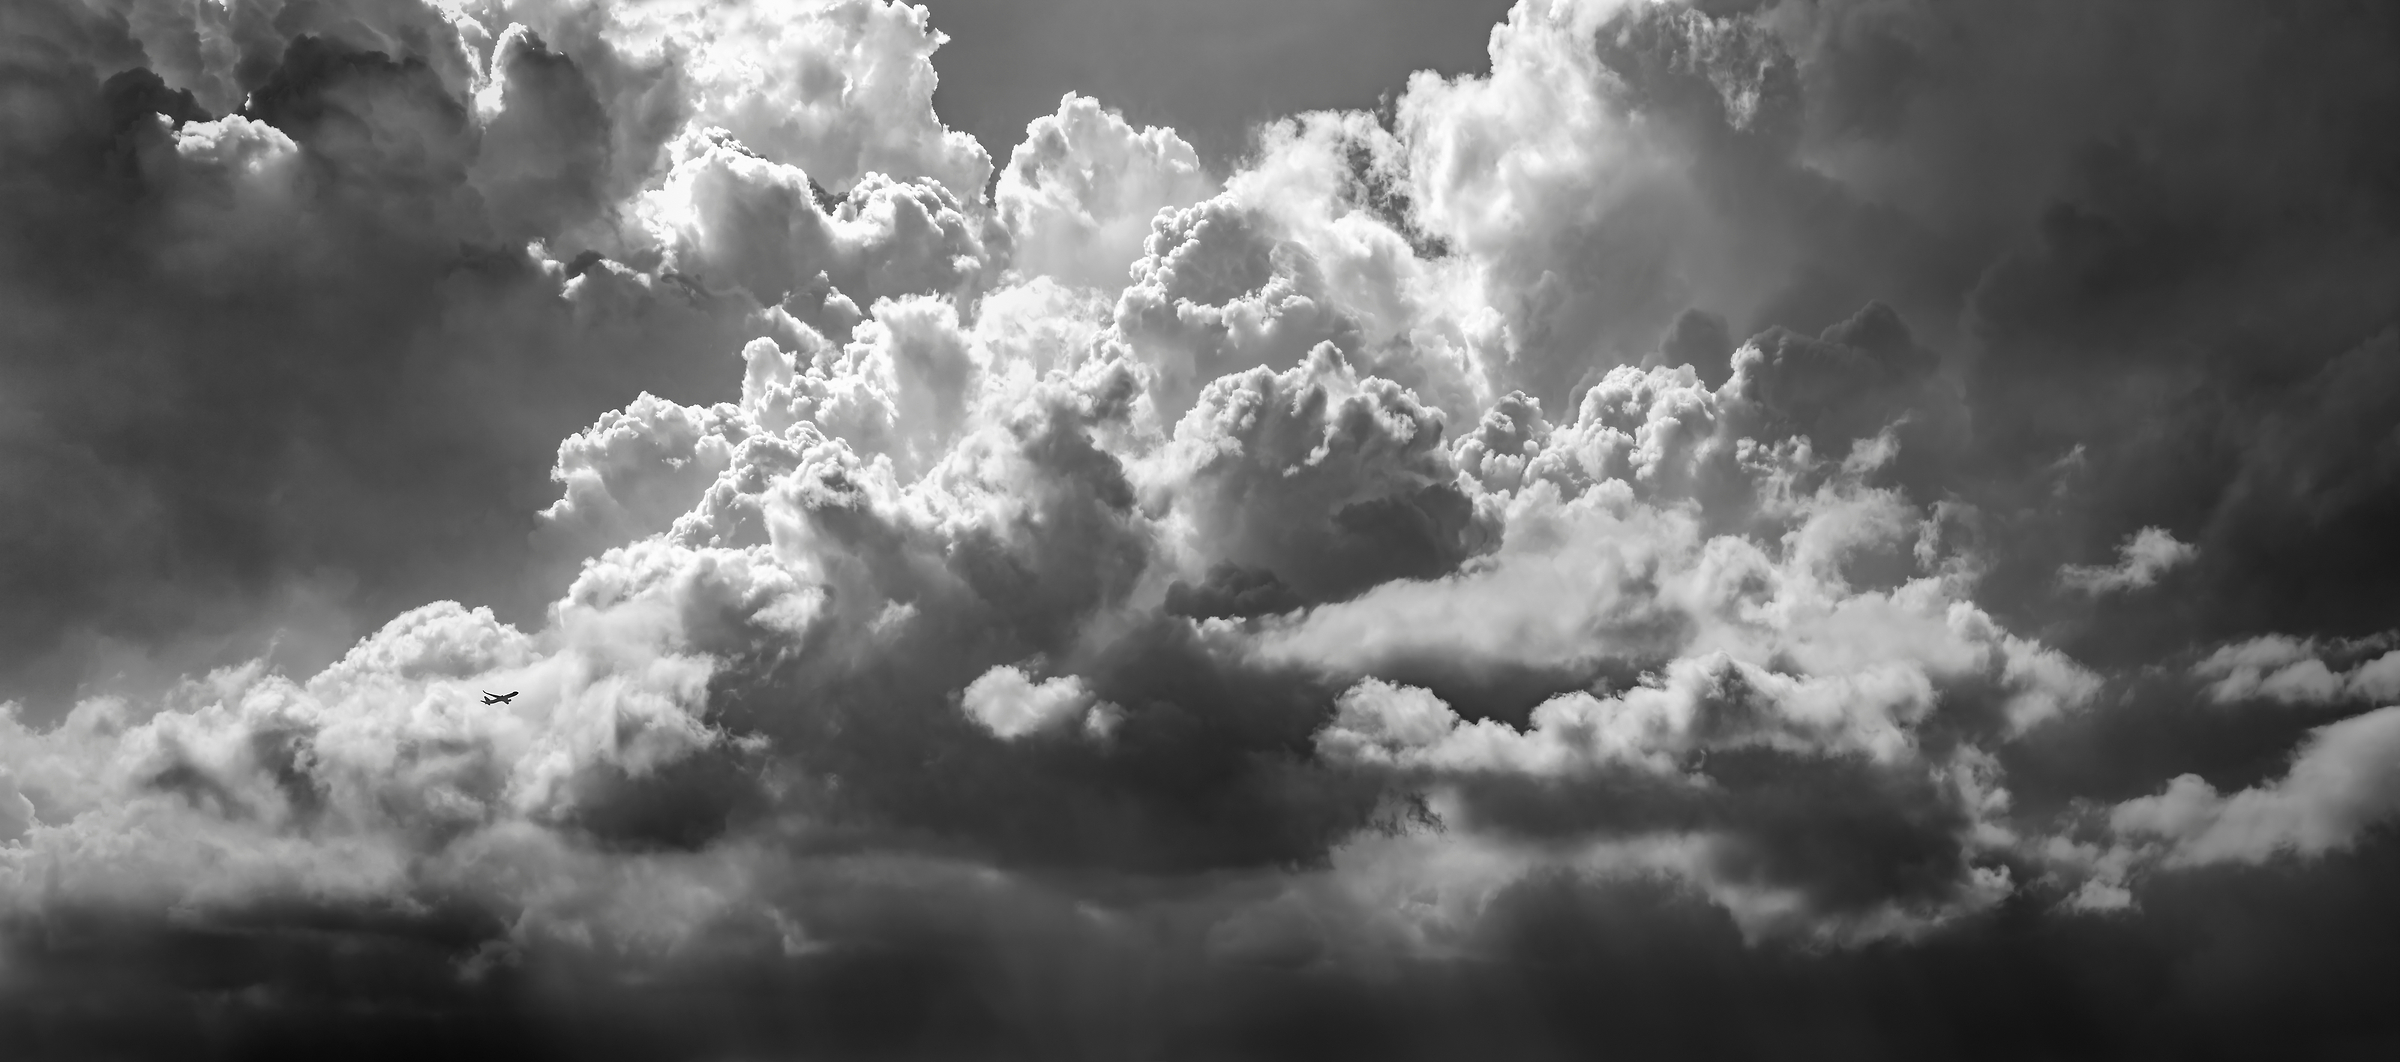 452 megapixels! A very high resolution, large-format, black & white VAST photo print of clouds; photograph created by Dan Piech in New York City.